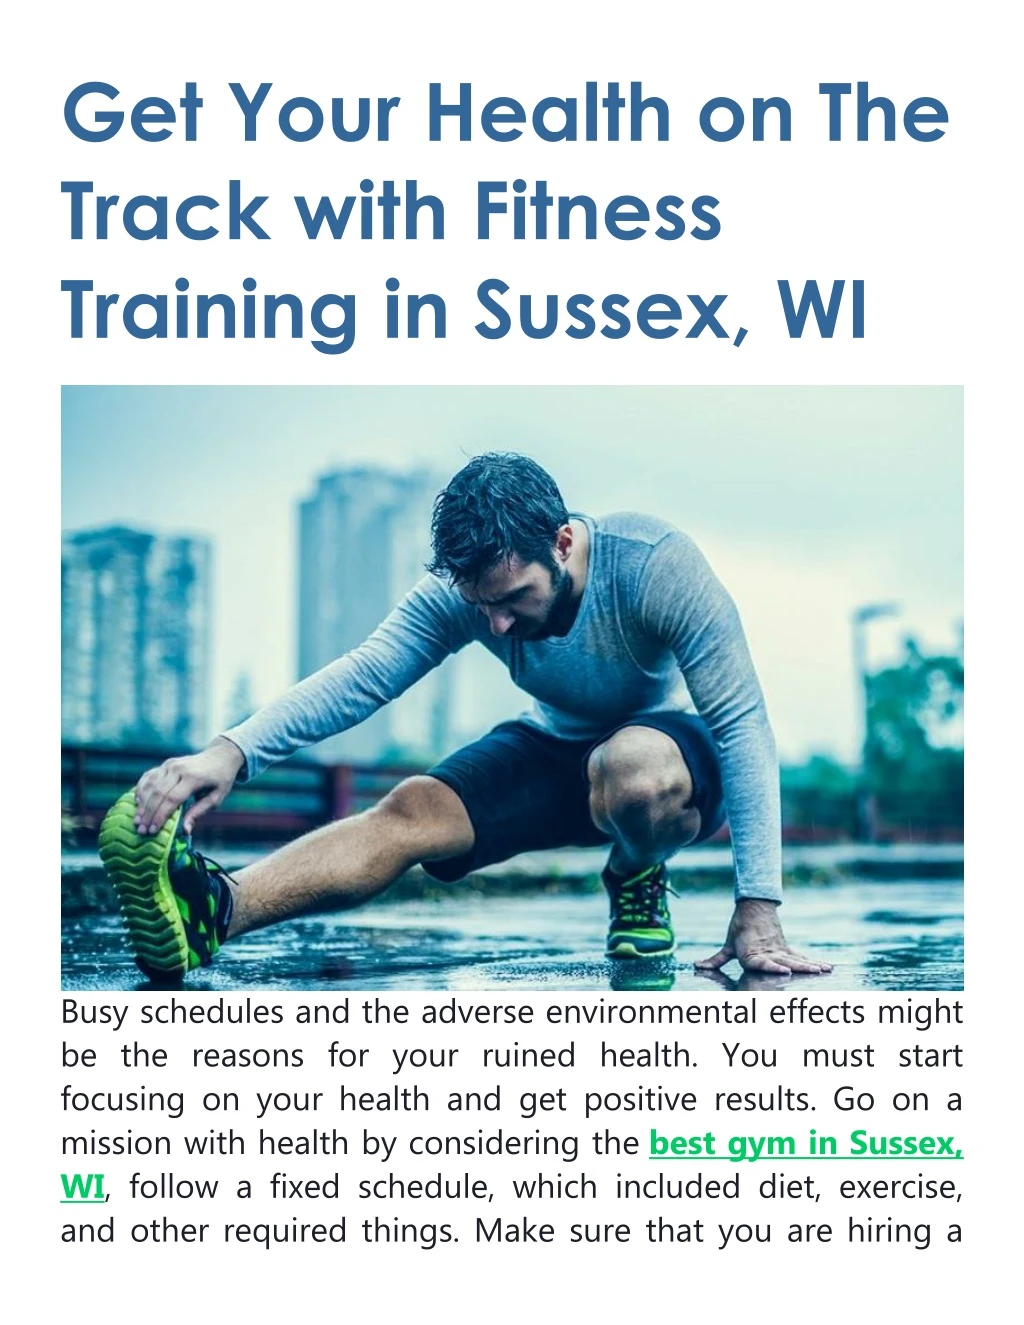 get your health on the track with fitness